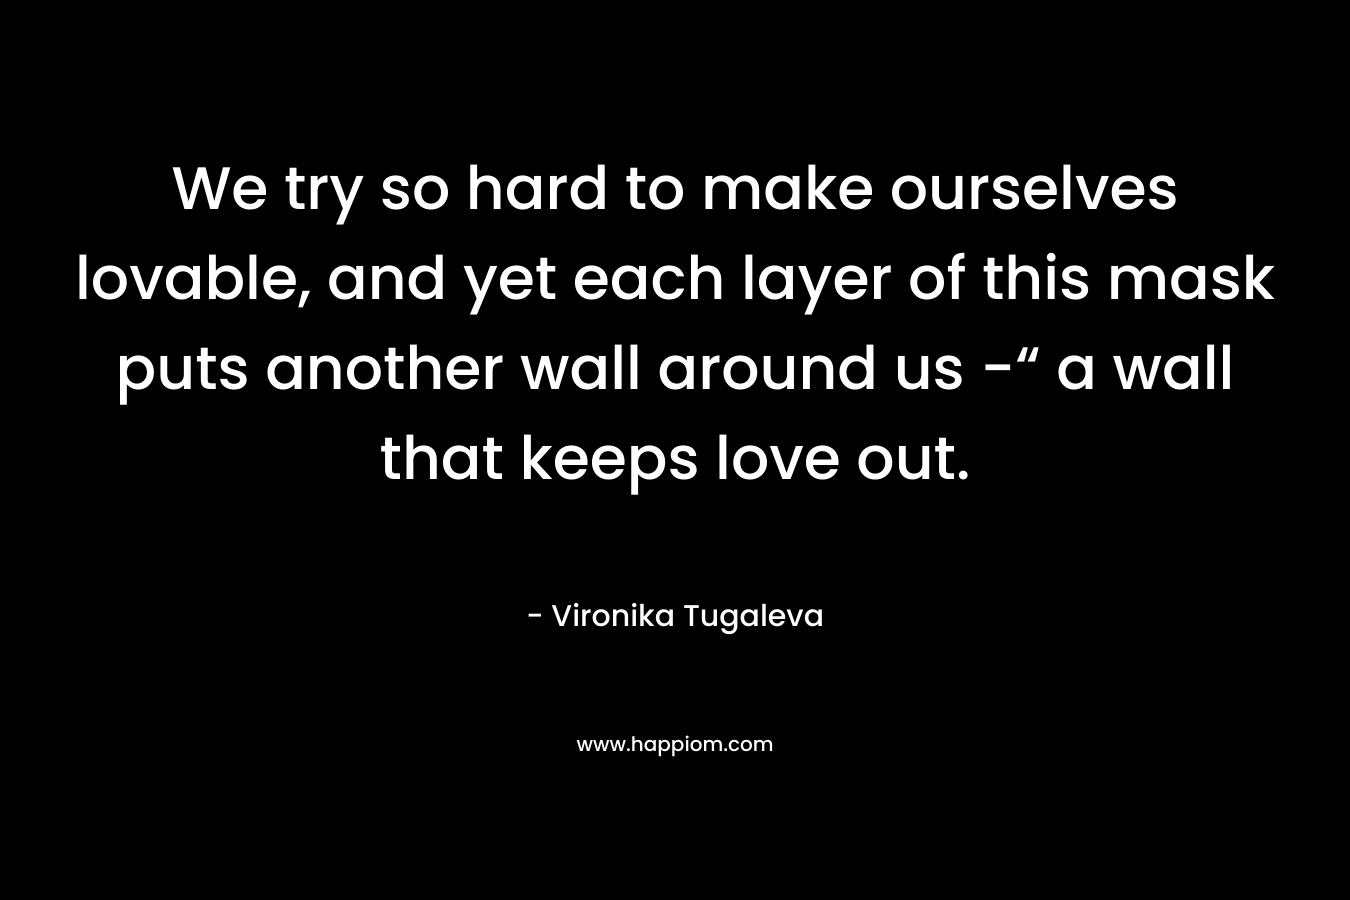 We try so hard to make ourselves lovable, and yet each layer of this mask puts another wall around us -“ a wall that keeps love out. – Vironika Tugaleva